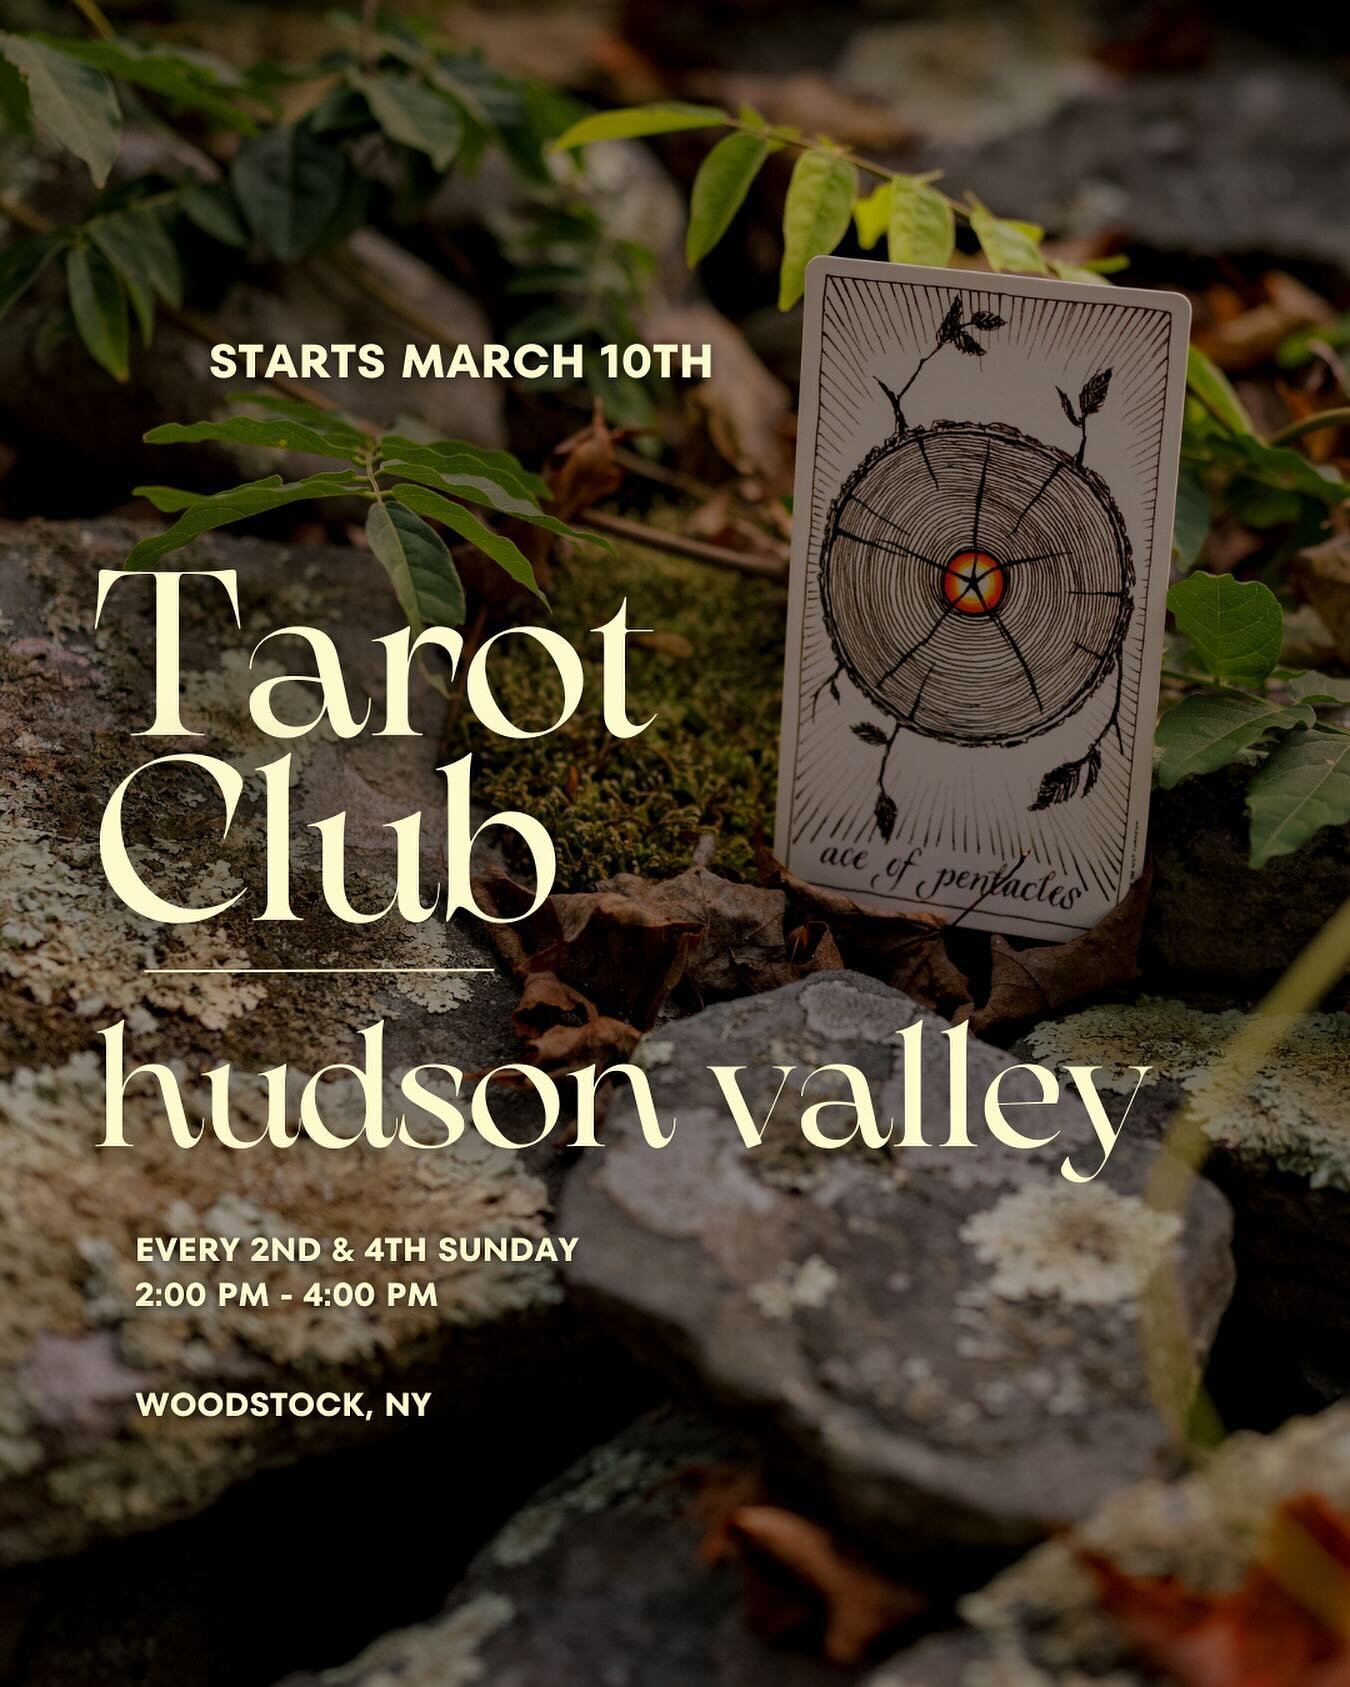 📣 Calling all Hudson Valley creatives! 

For those of you wanting to explore Tarot and begin creating a sustainable spiritual practice in aligned community&mdash; this is for you. 

Tarot Club: Hudson Valley
Every 2nd &amp; 4th Sunday
2:00 PM - 4:00